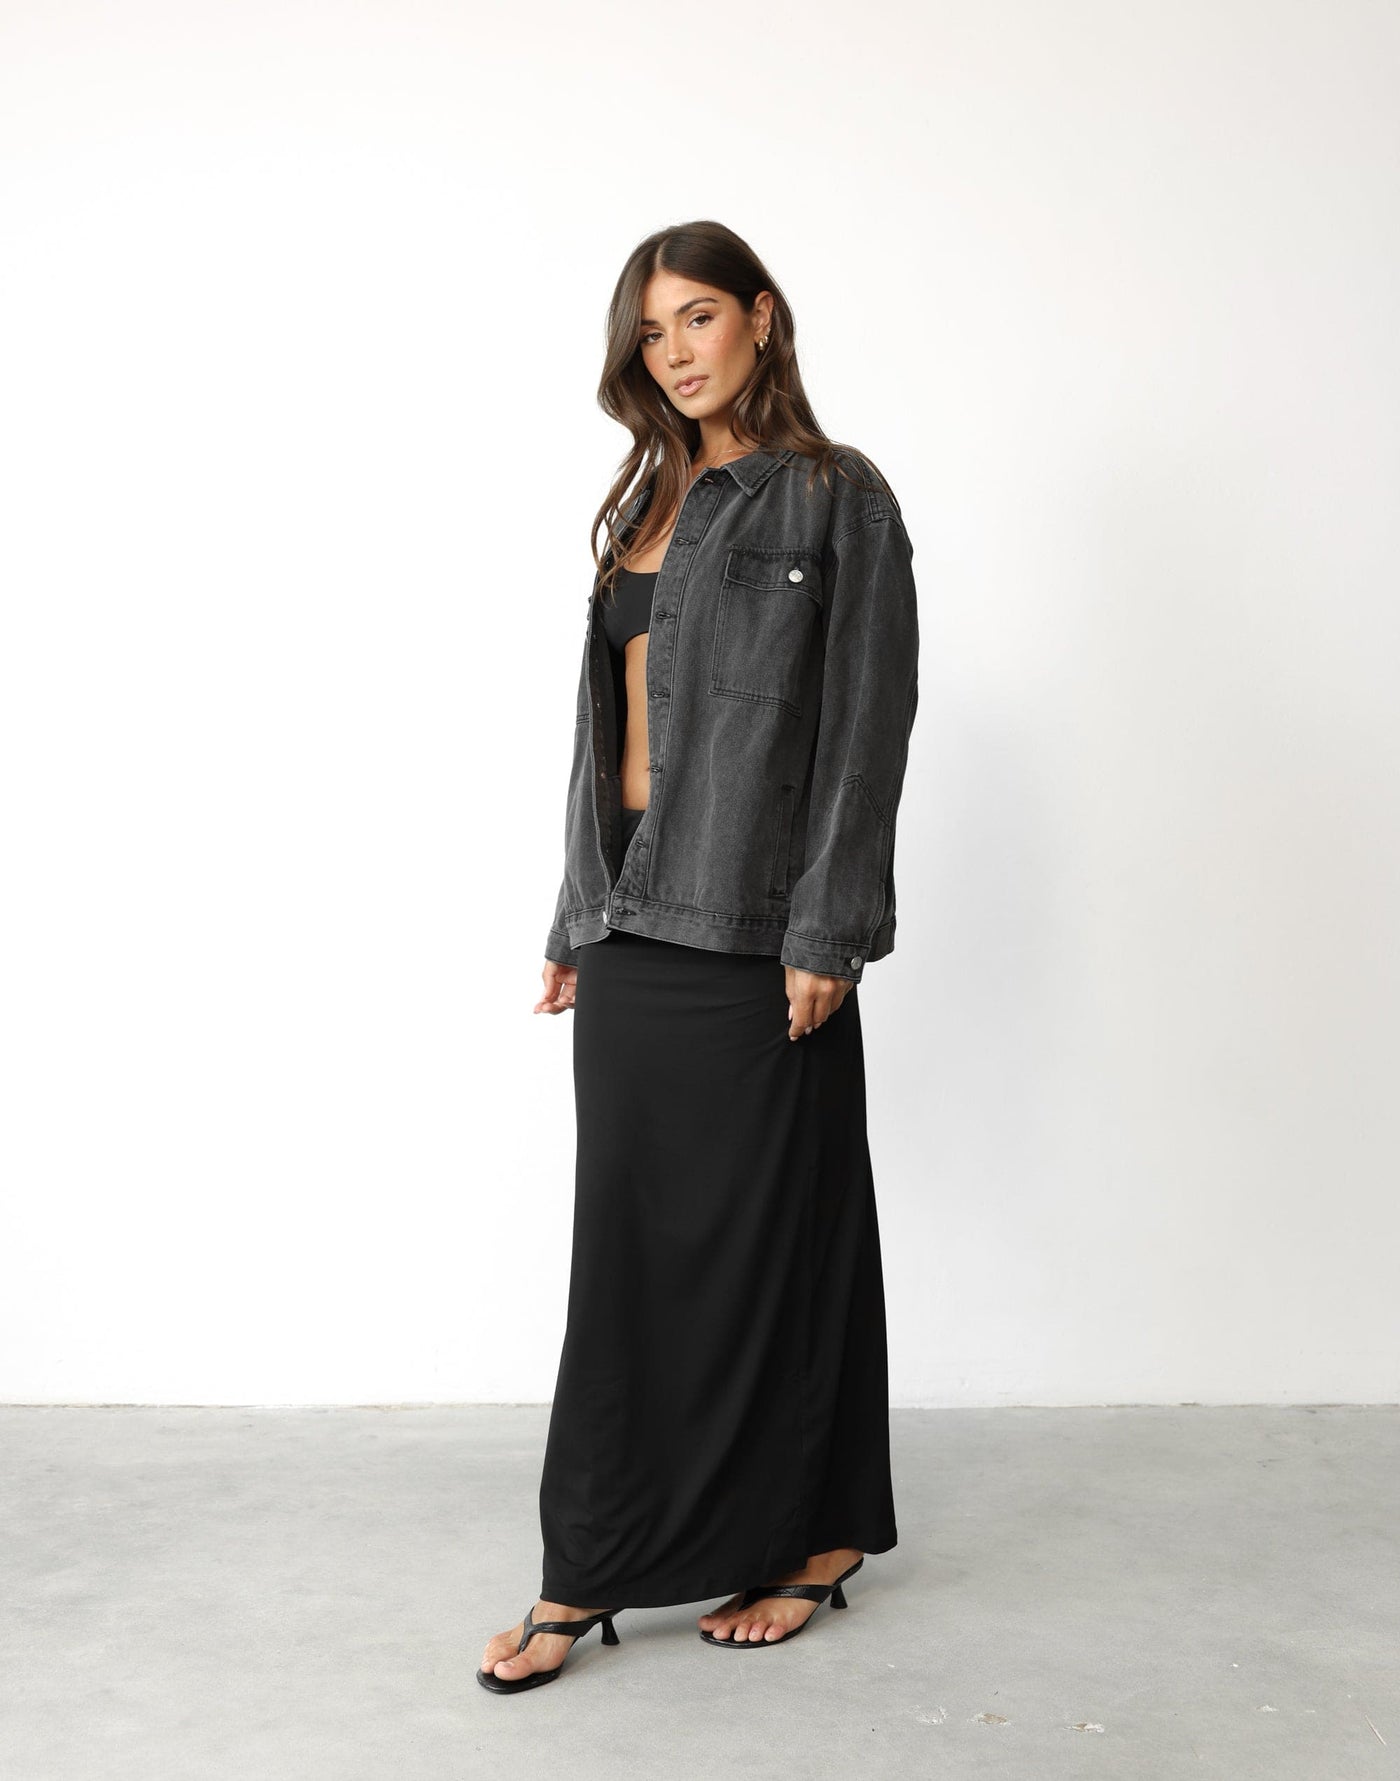 Lindsay Maxi Skirt (Black) | Charcoal Clothing Exclusive - Bodycon Jersey Maxi Skirt - Women's Skirt - Charcoal Clothing